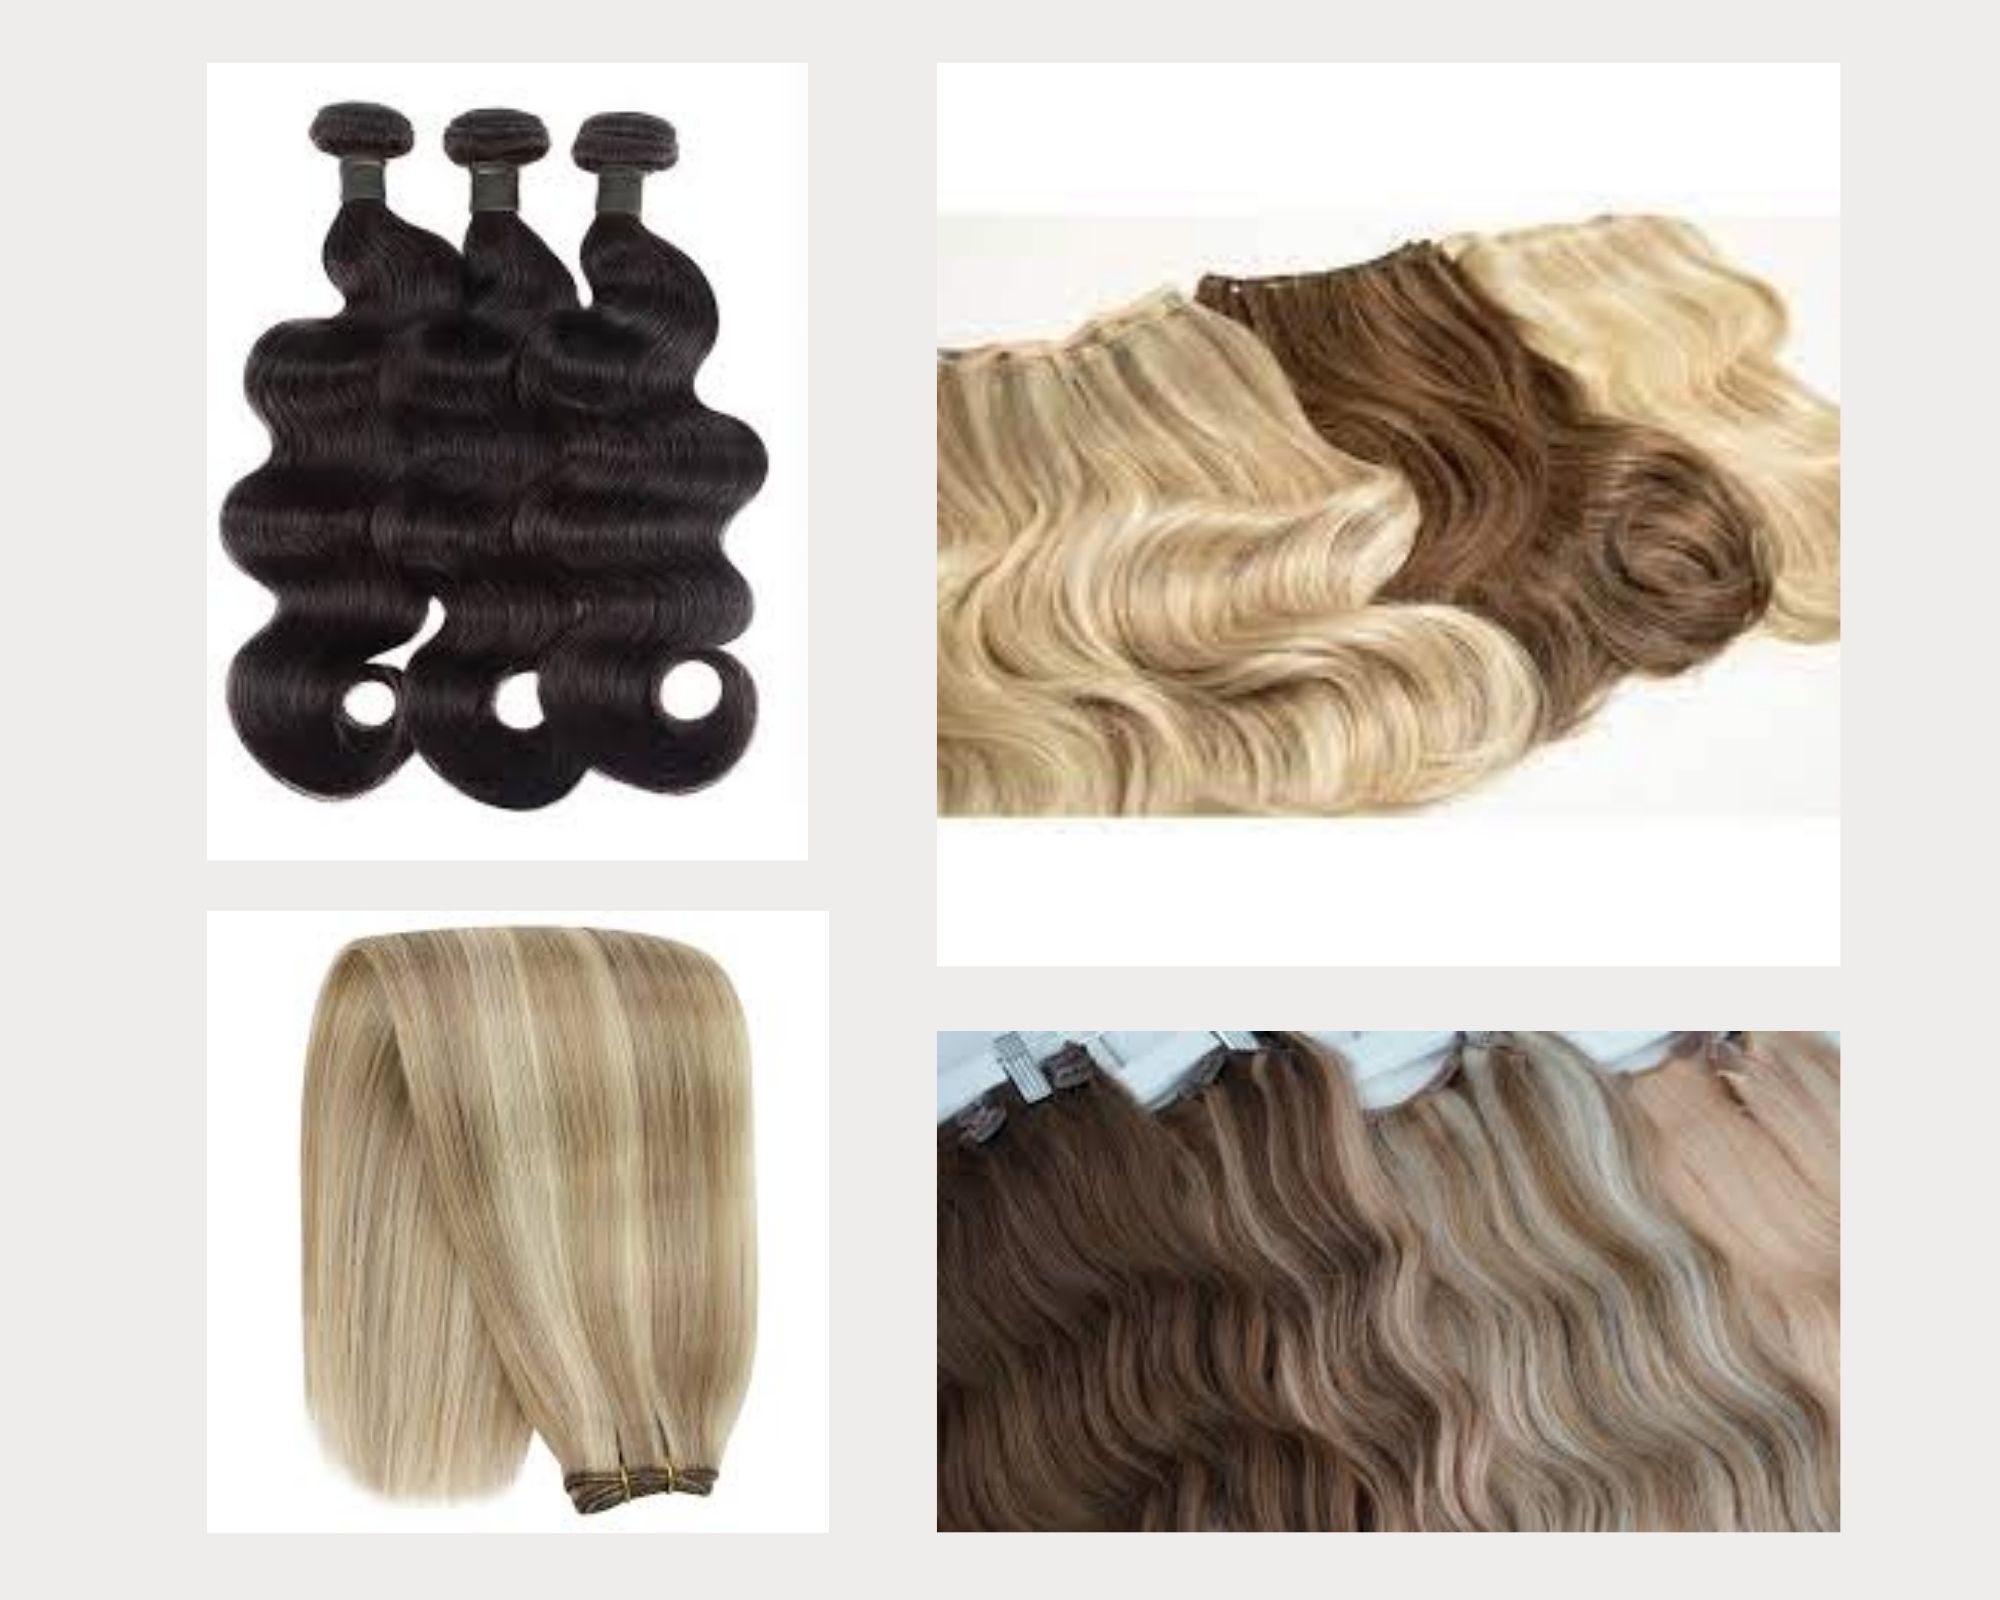 weft-hair-extension-products-never-go-fashion-2